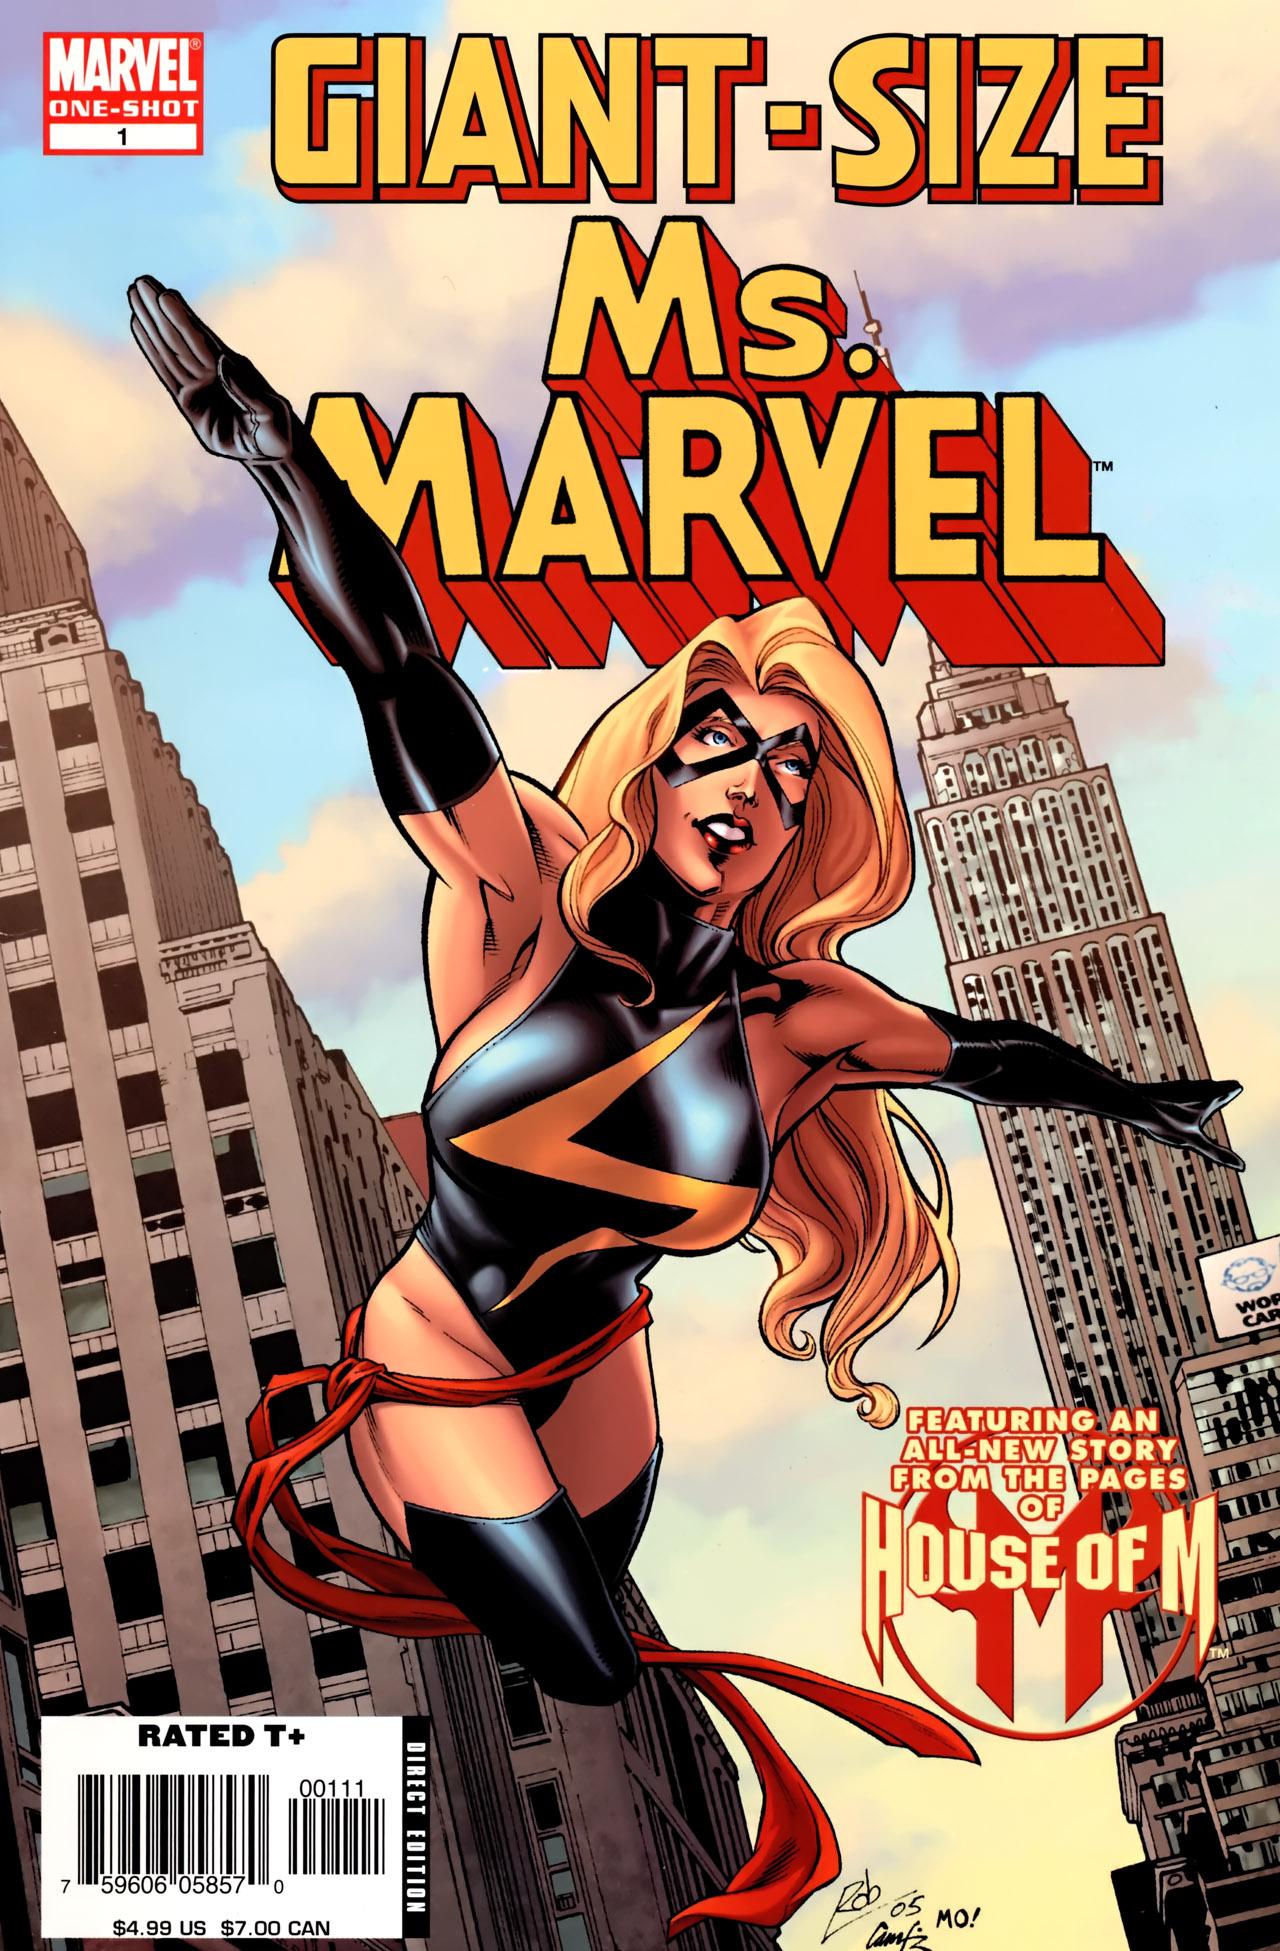 Giant-Size Ms. Marvel Vol. 1 #1